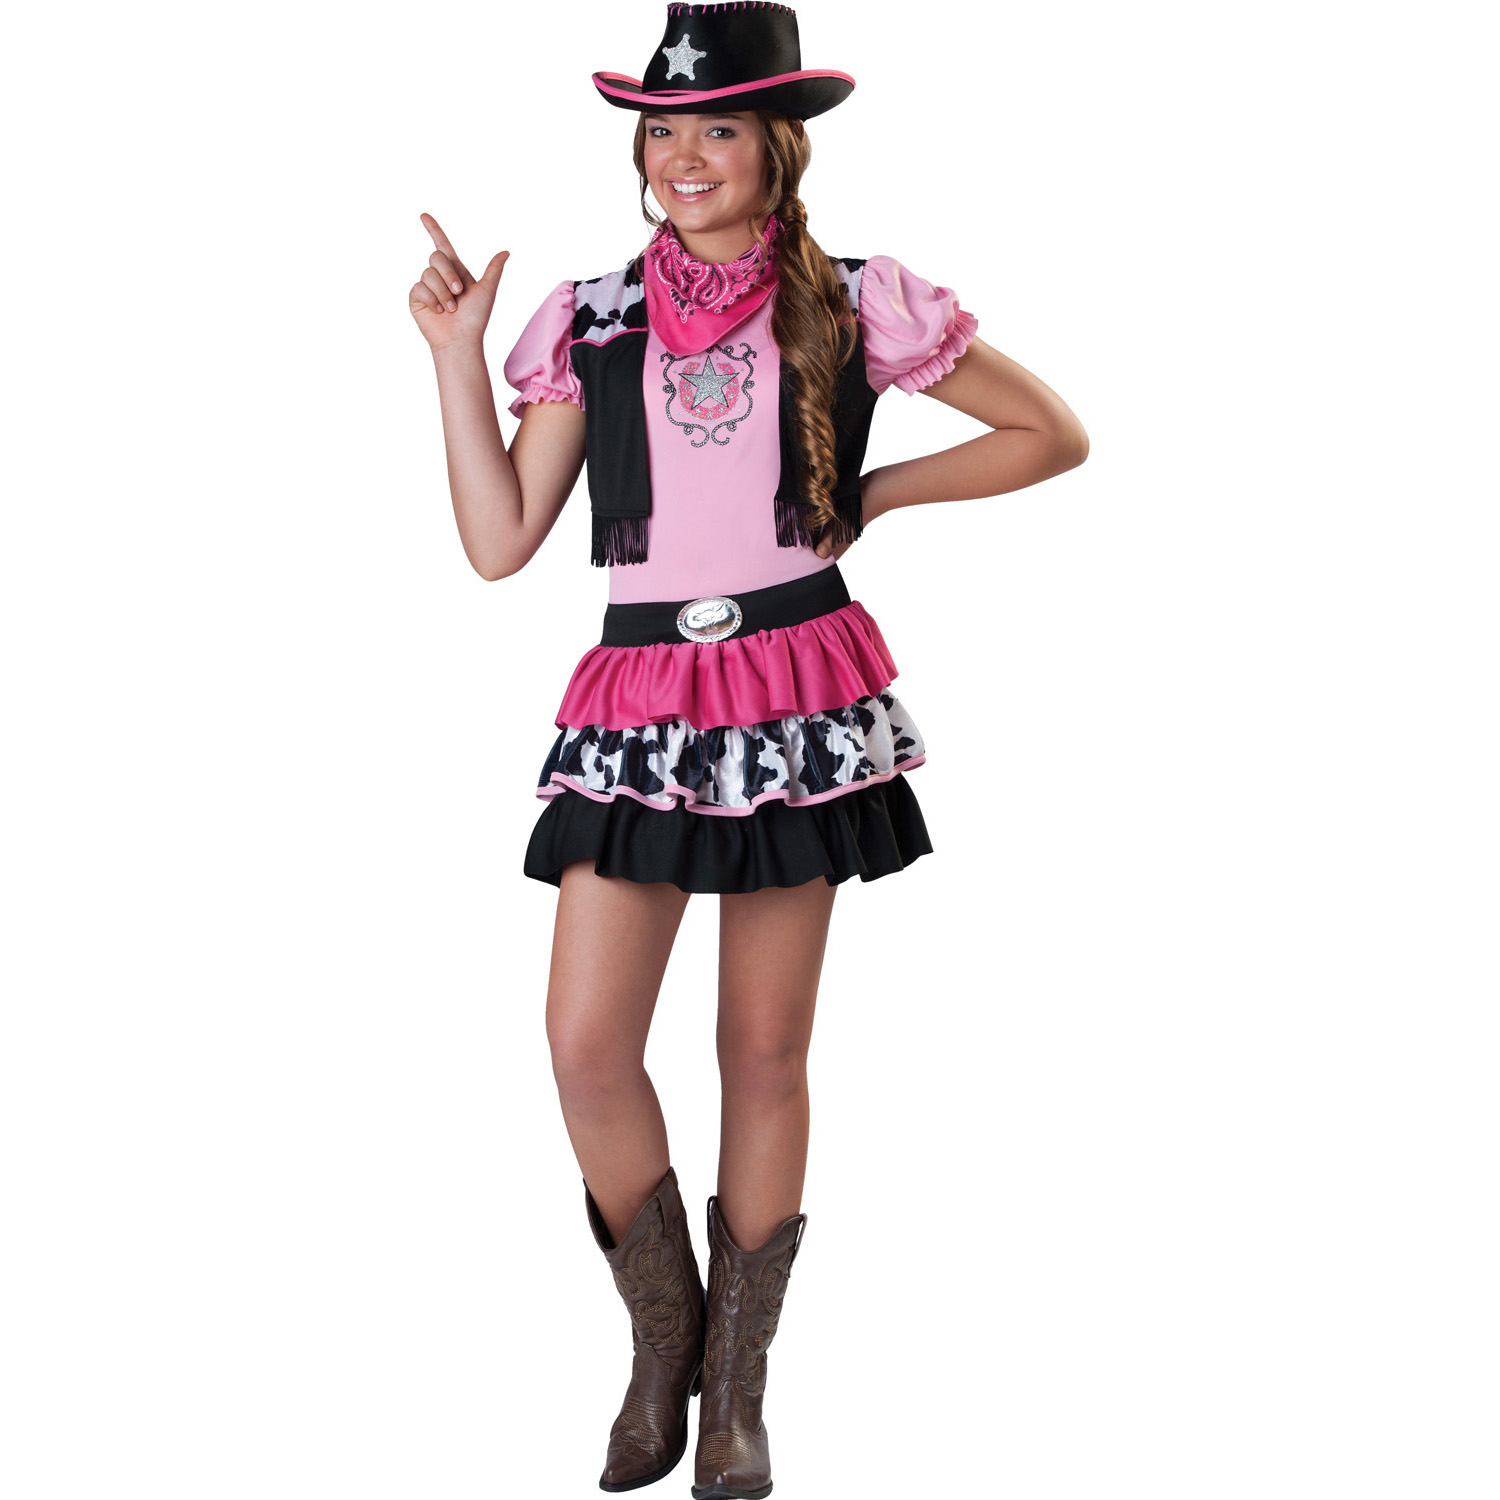 Child Costume Giddy Up Girl Age 8 - 10 Years : Amscan Europe